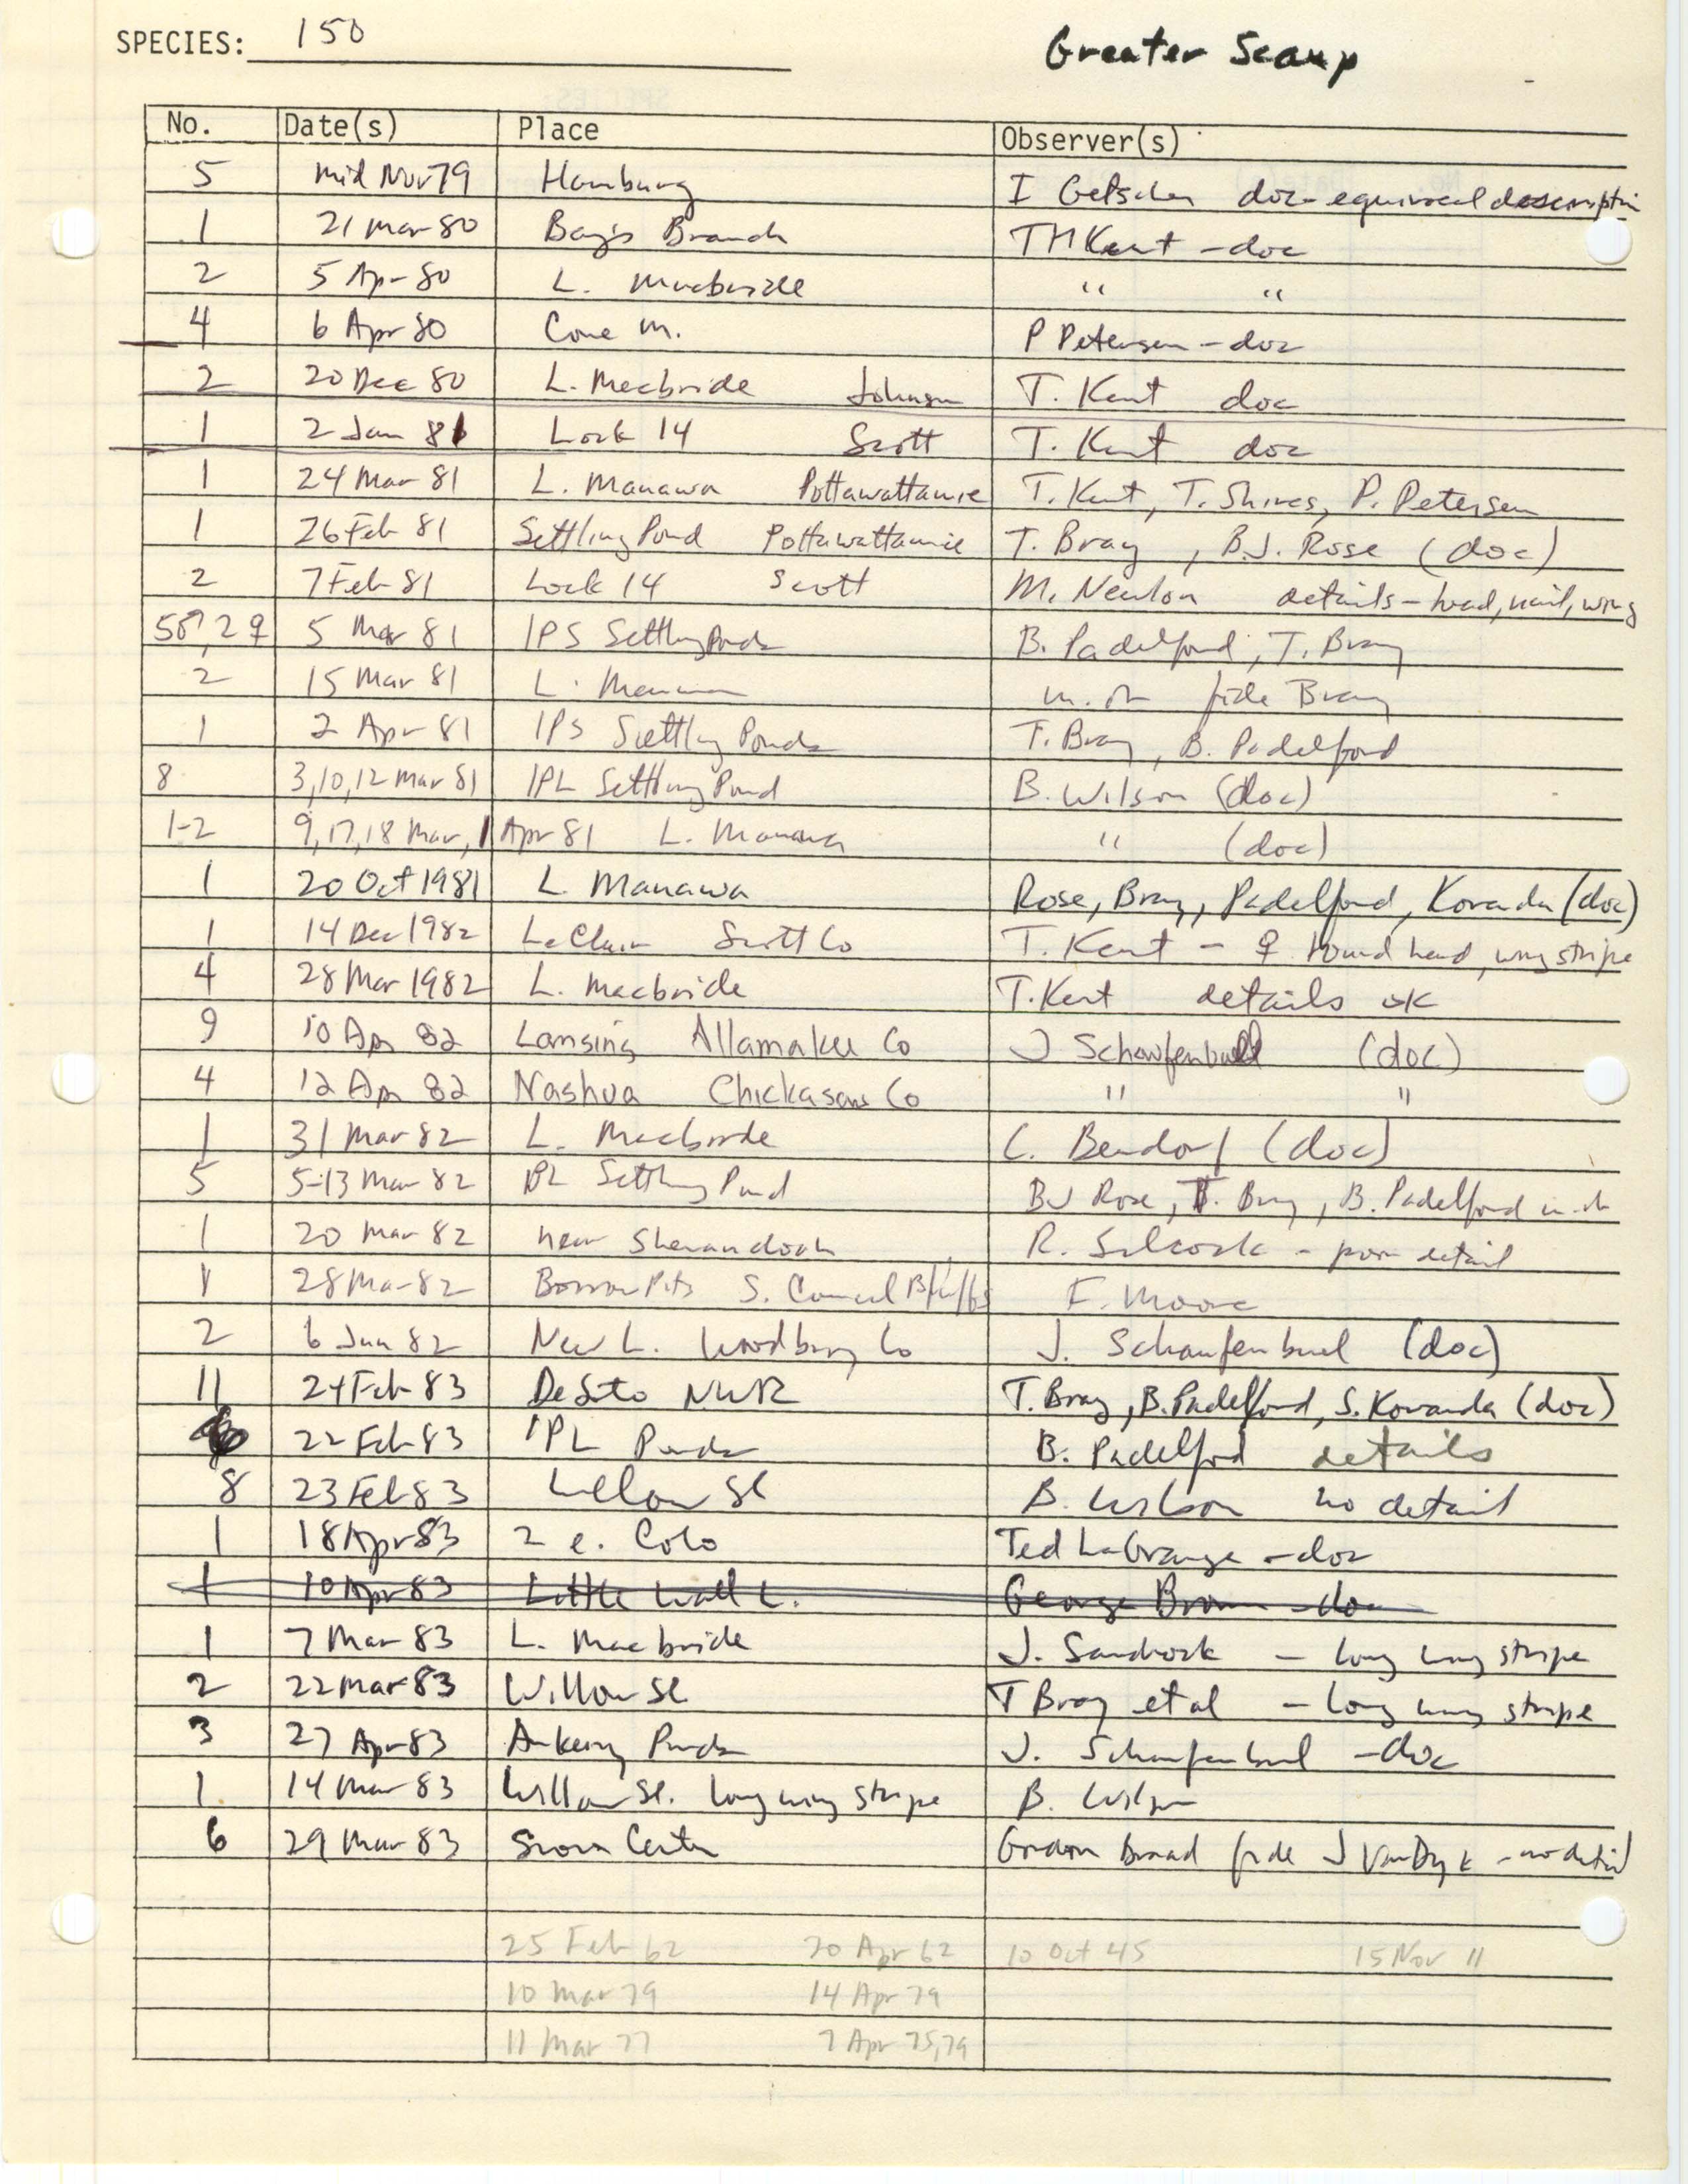 Iowa Ornithologists' Union, field report compiled data, Greater Scaup, 1911-1983